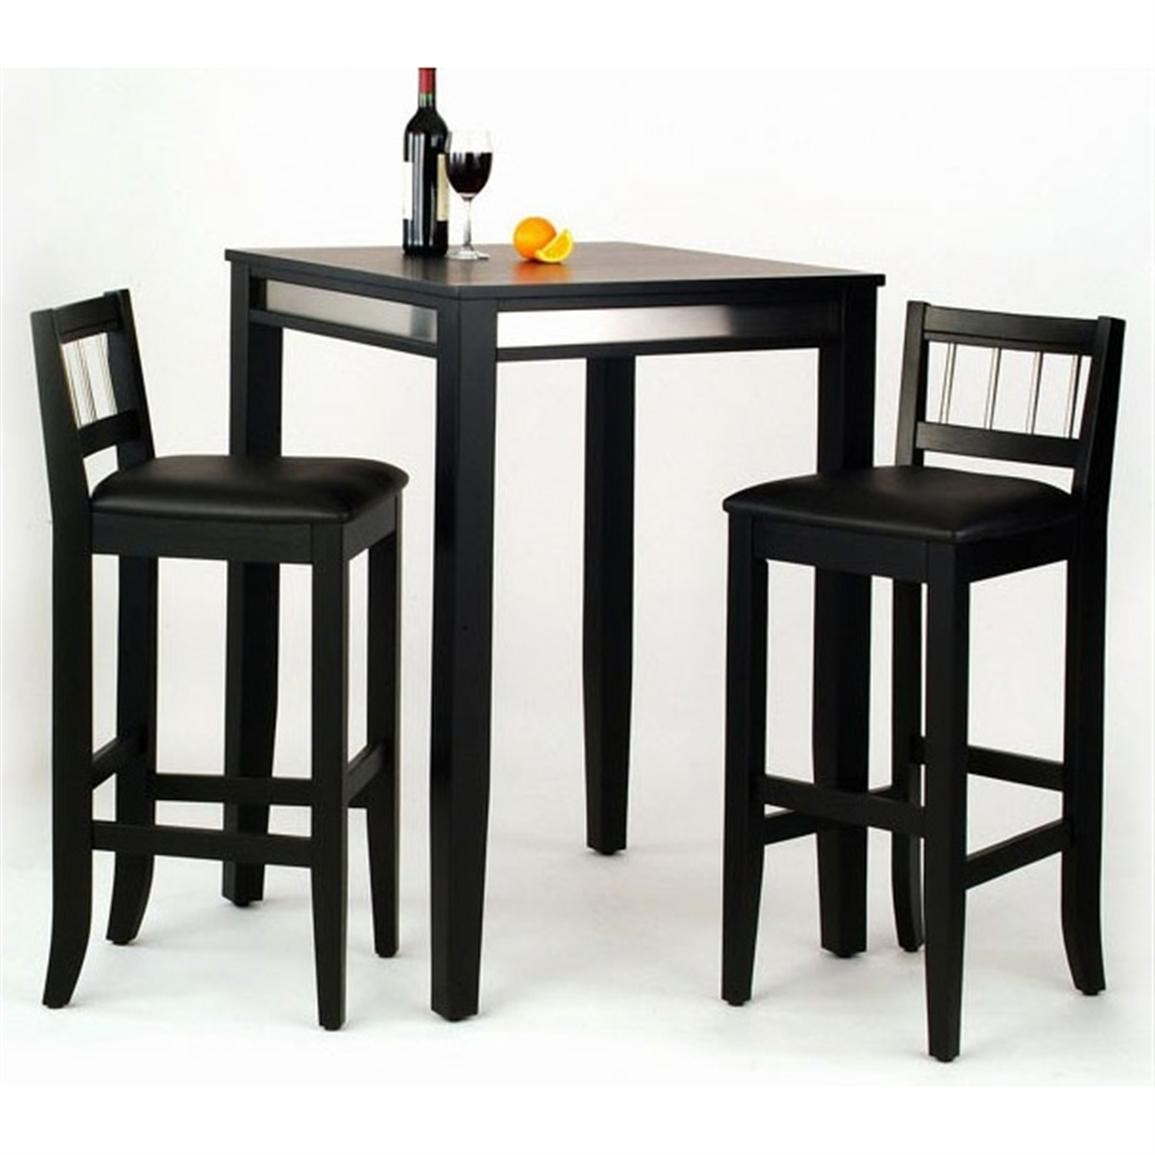 Home styles tm manhattan black pub table with stainless